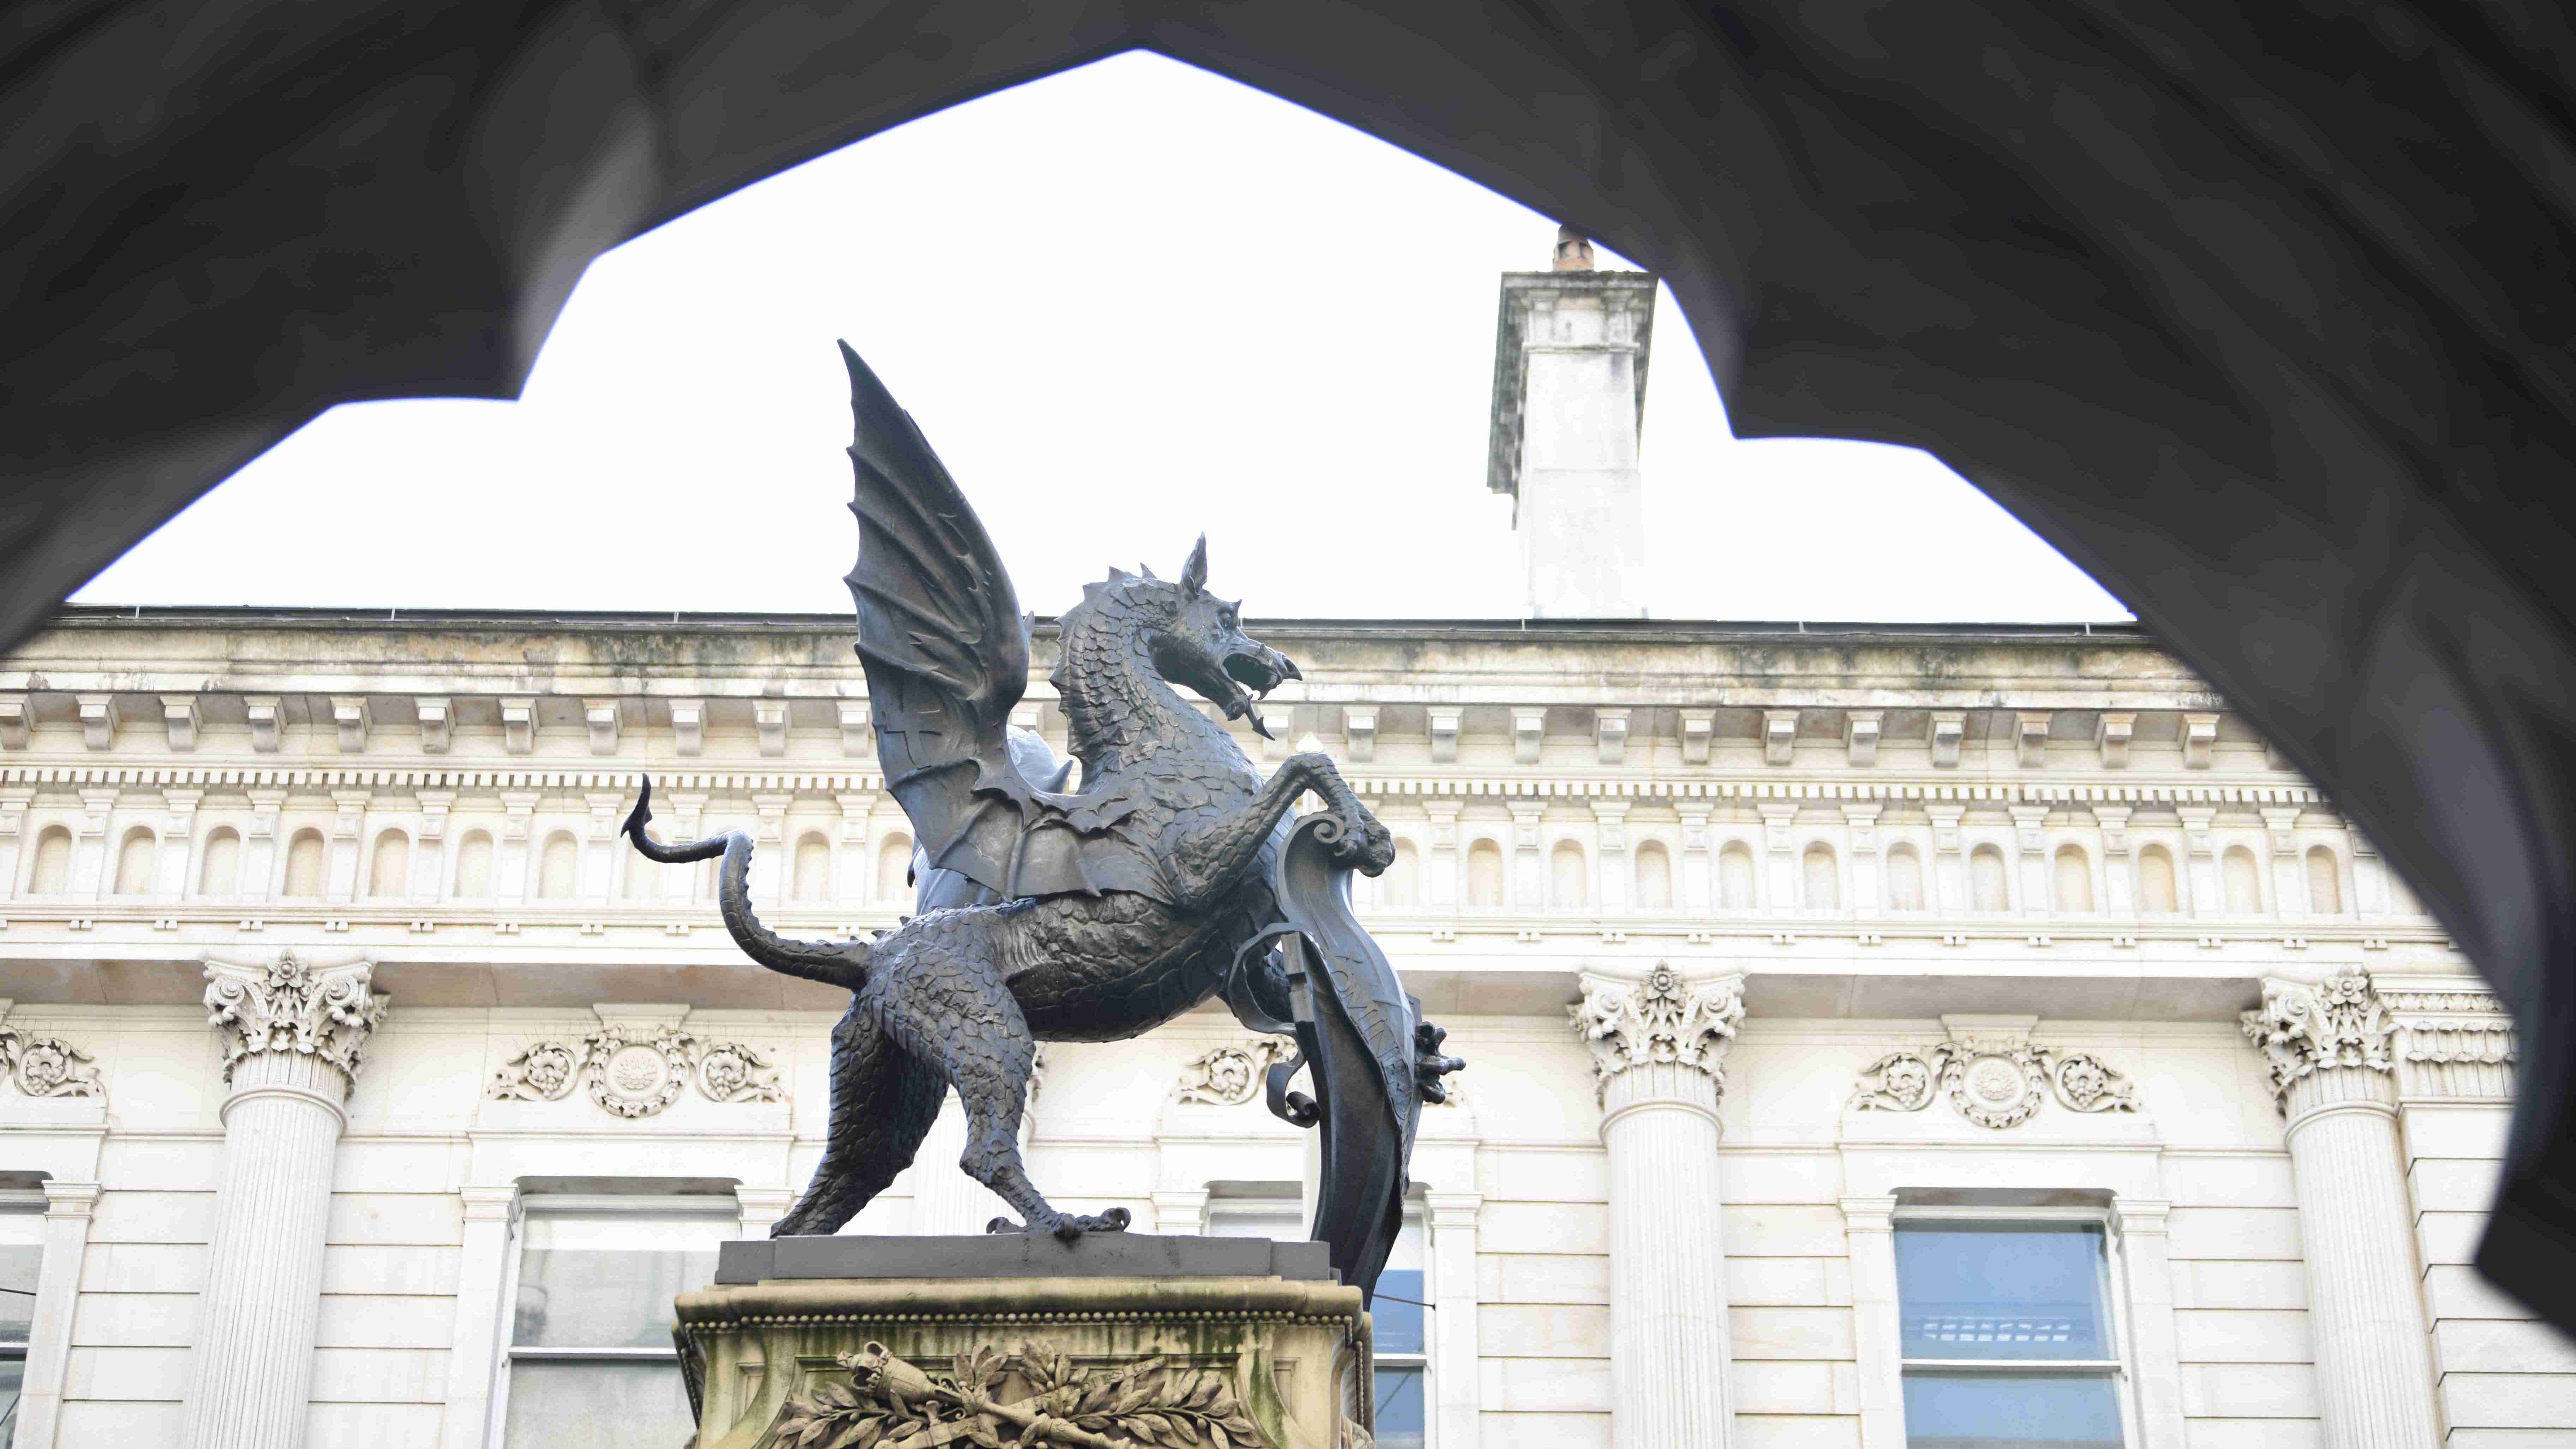 A dragon statue at the entrace of the City of London, the UK. /CGTN Europe